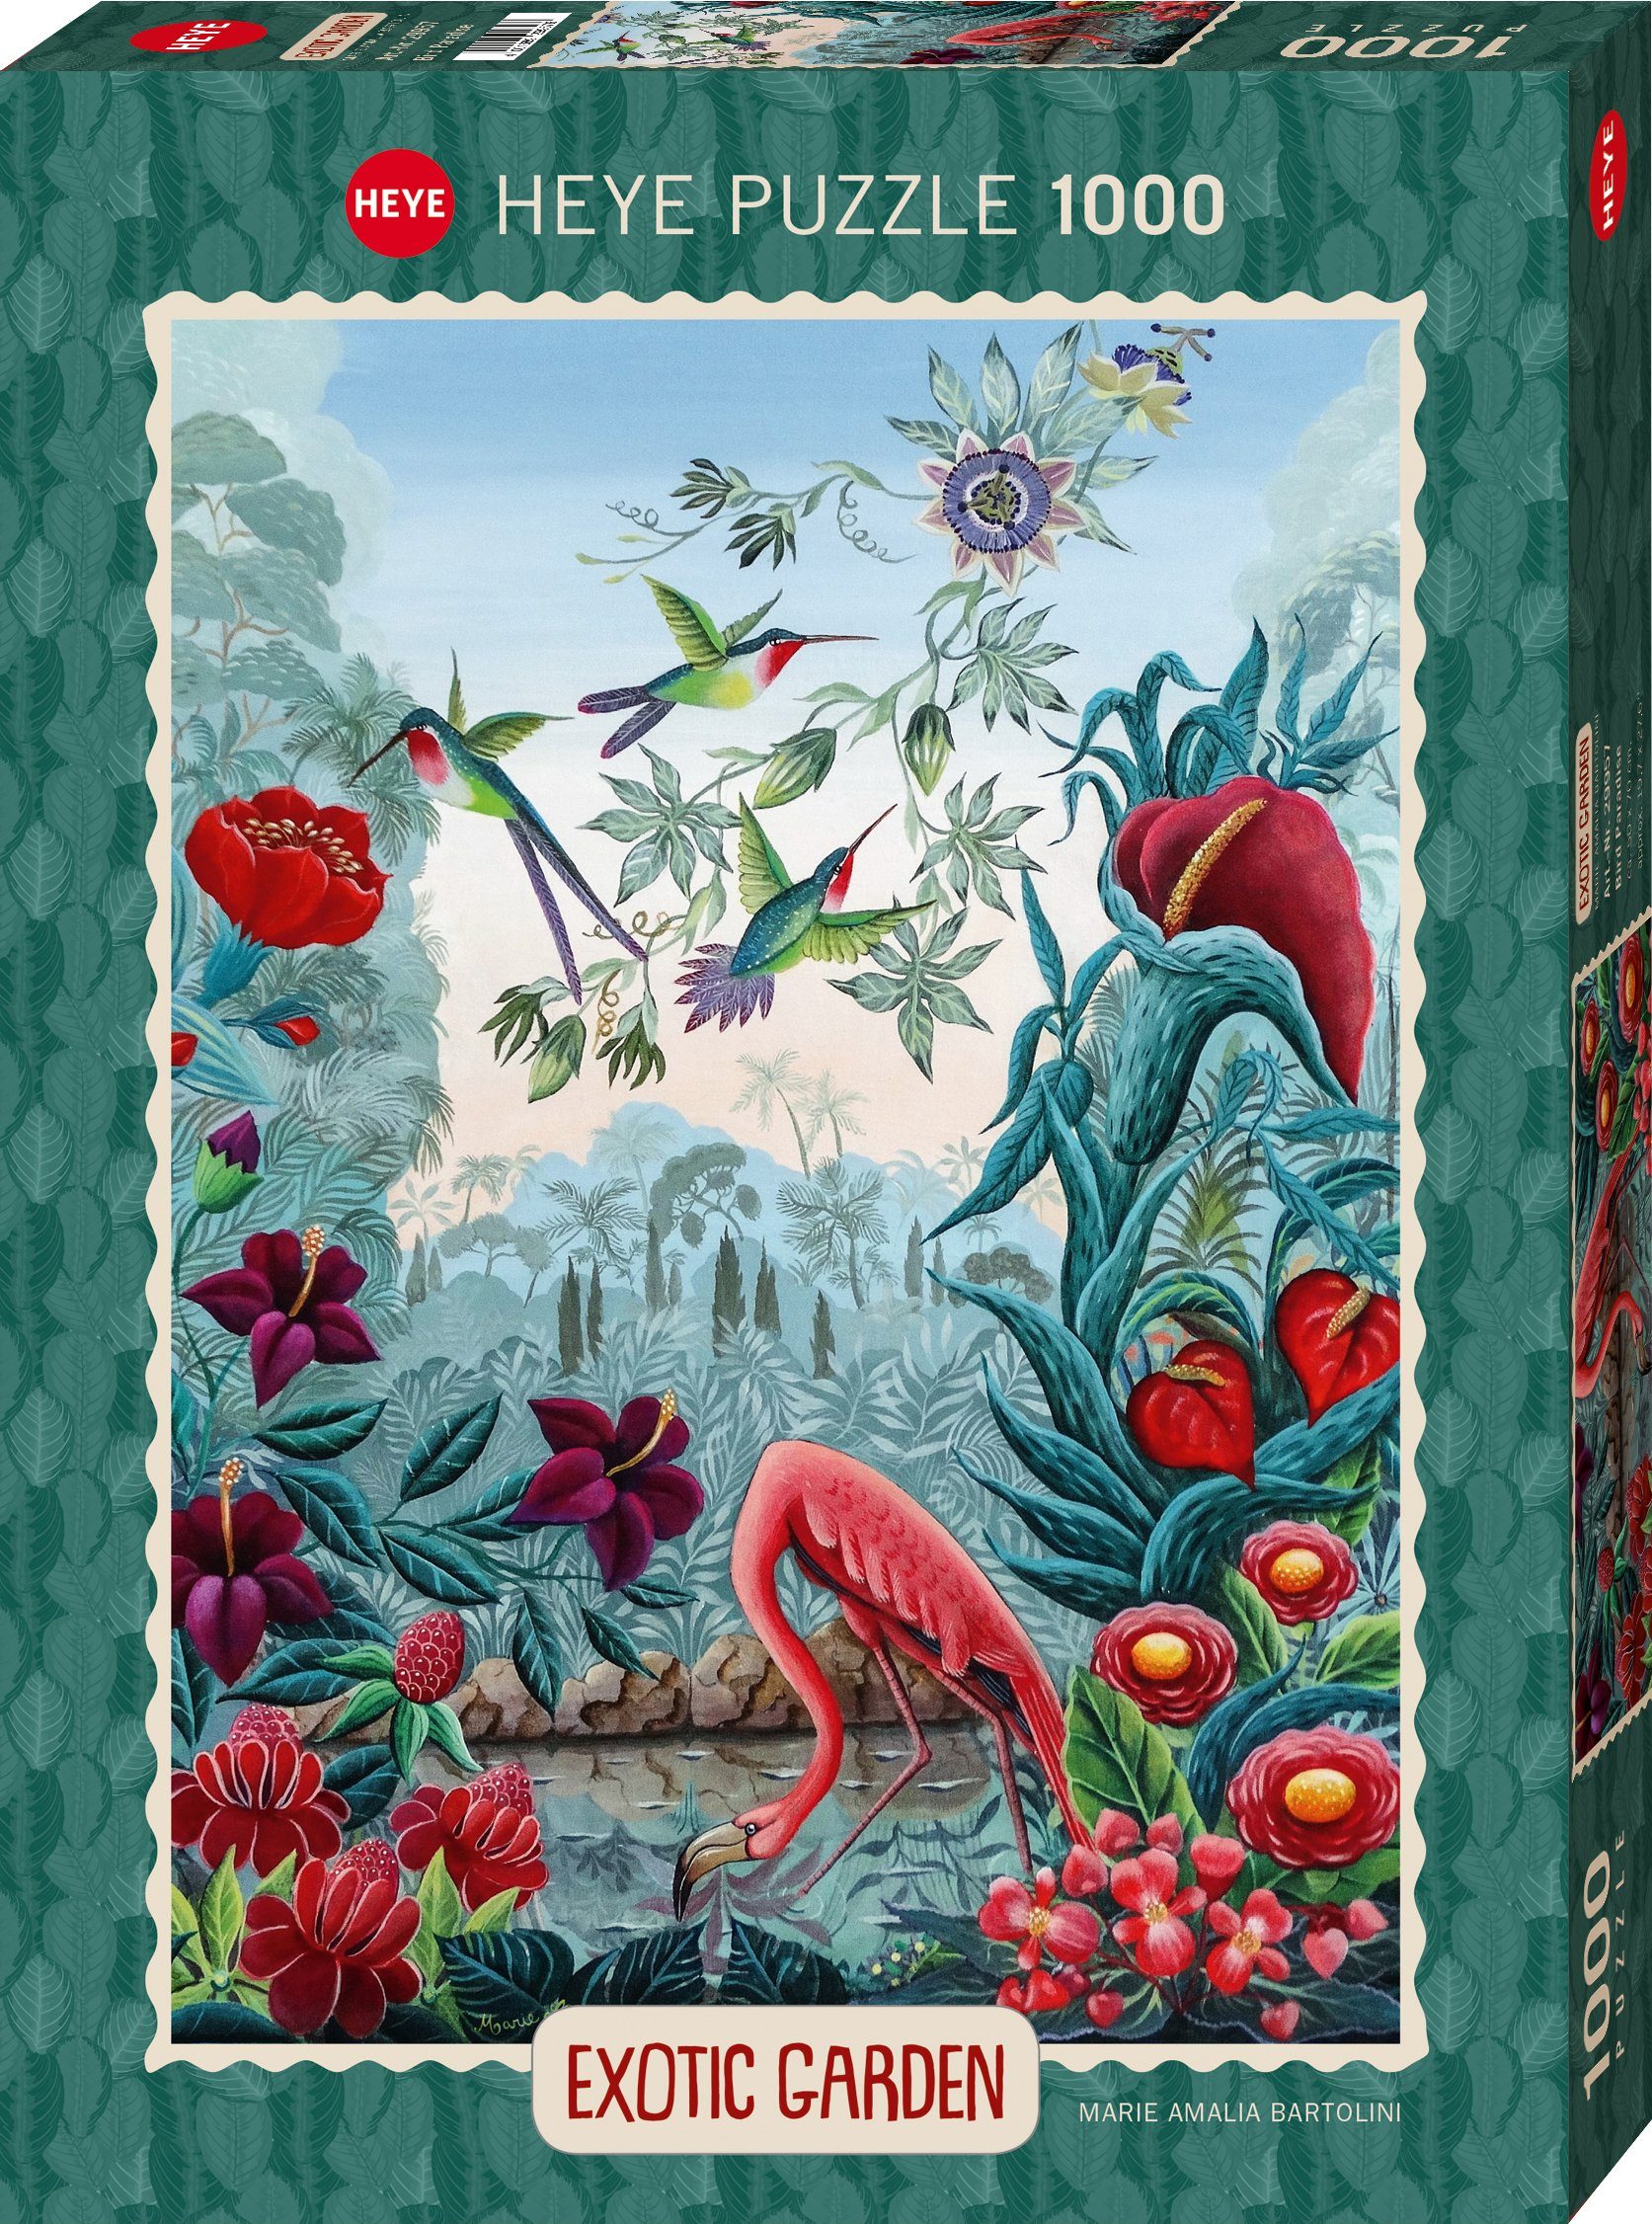 HEYE Puzzle Bird Exotic Garden, 1000 / Germany Puzzleteile, Paradise Made in